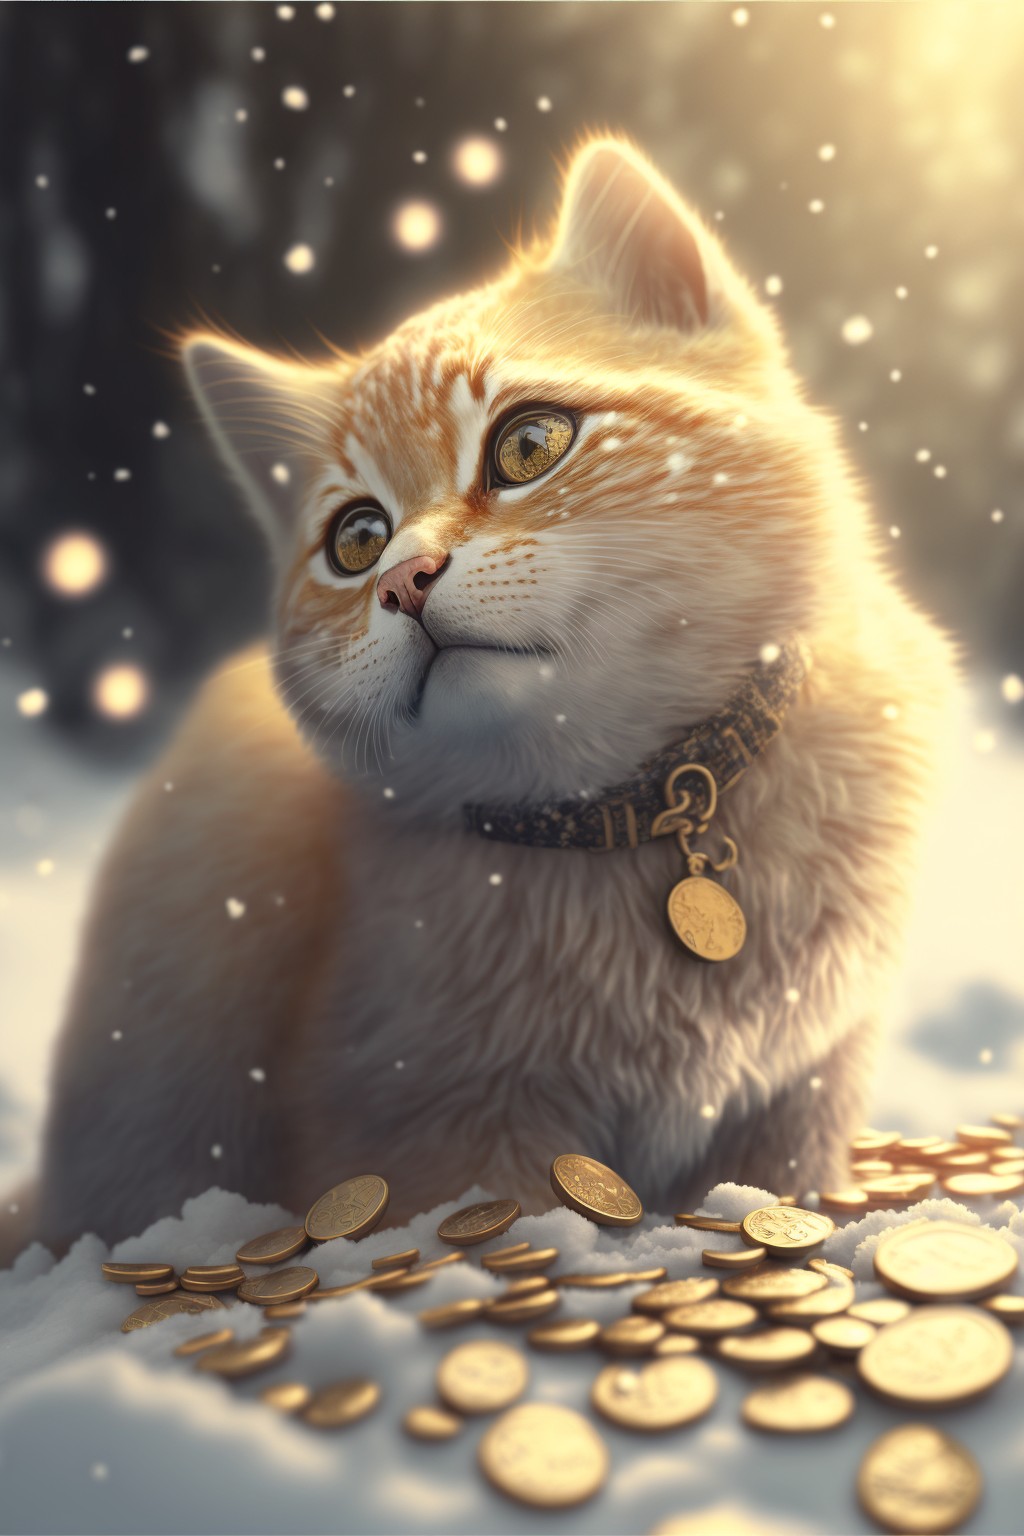 The super cute lucky cat who found gold coins